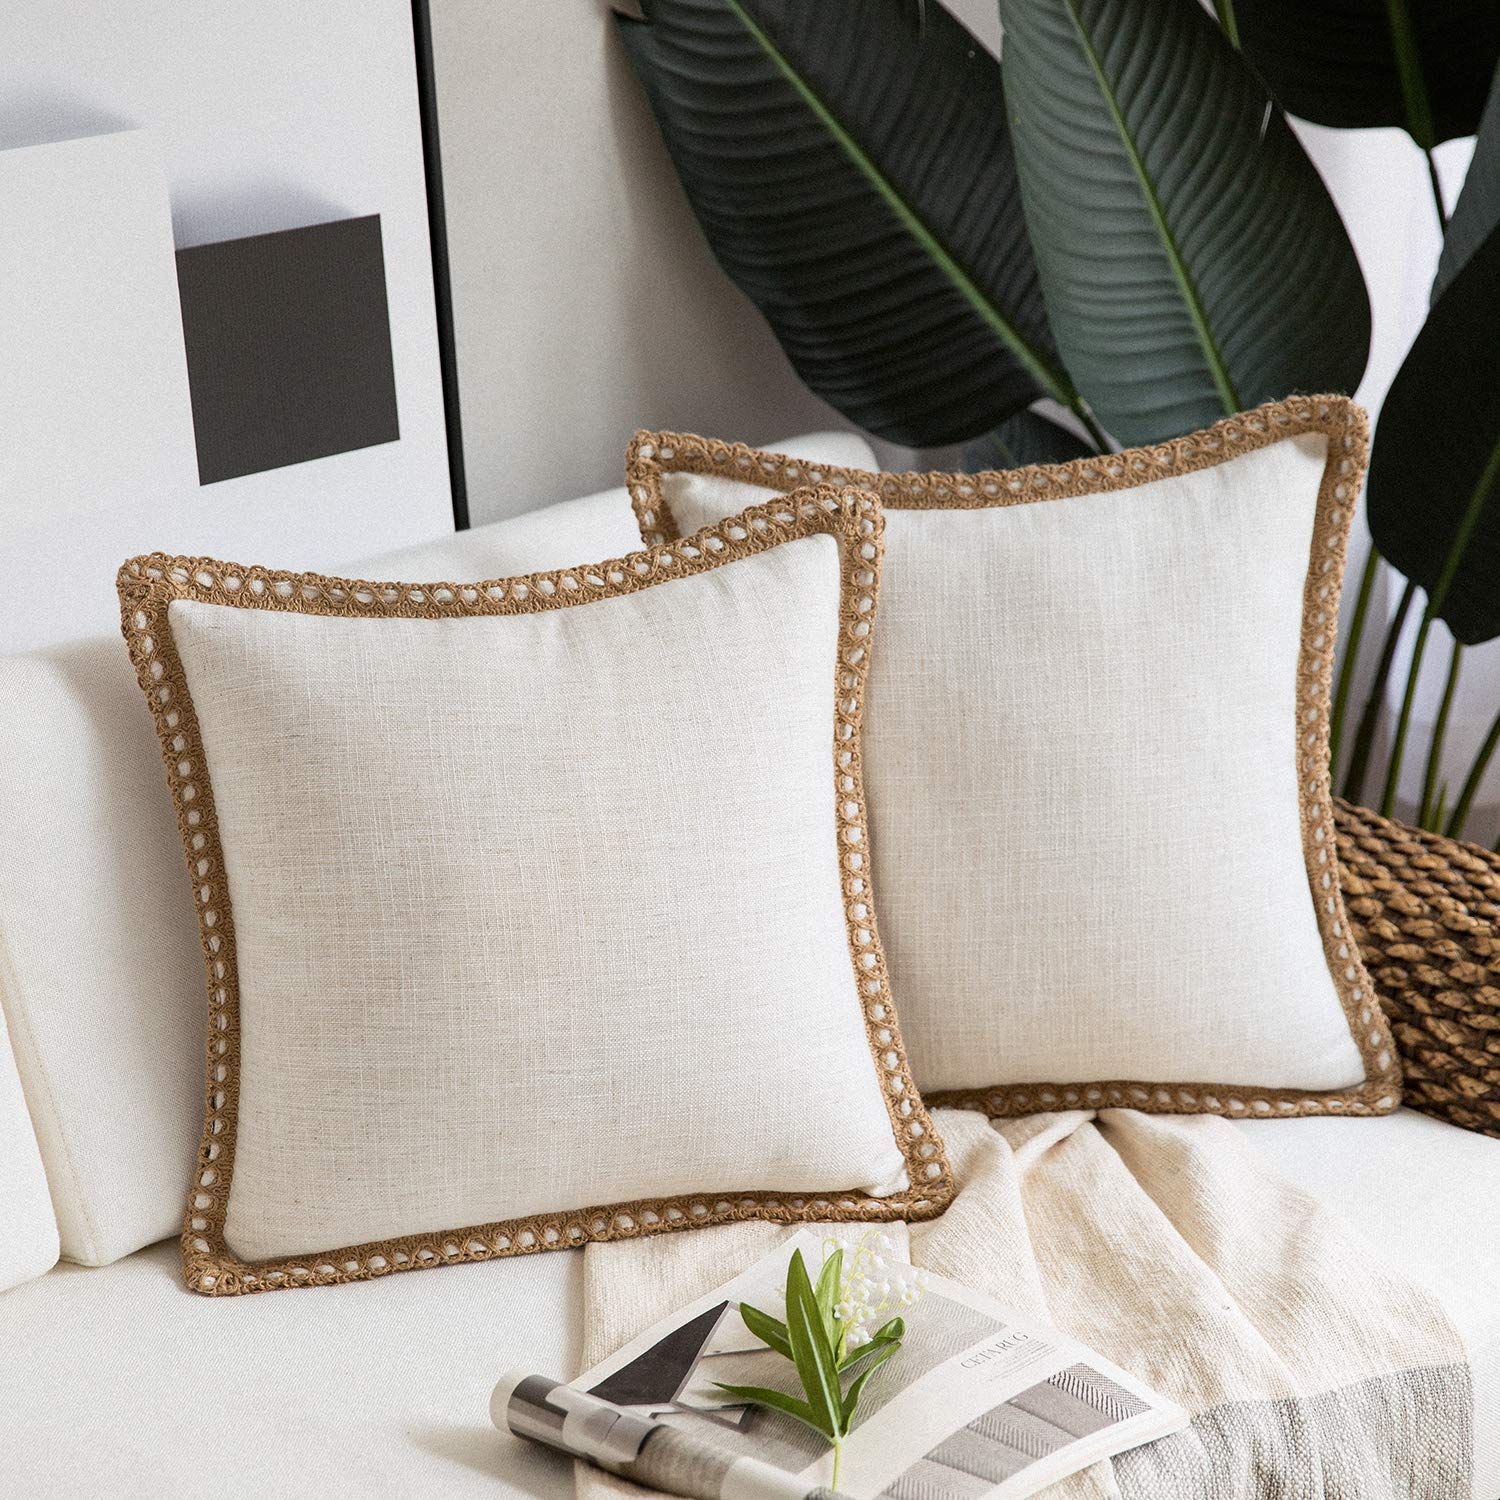 Sharing what's currently on my Amazon wish list today, just for fun. :) It's mostly pillows and other home decor items and it's all super affordable!